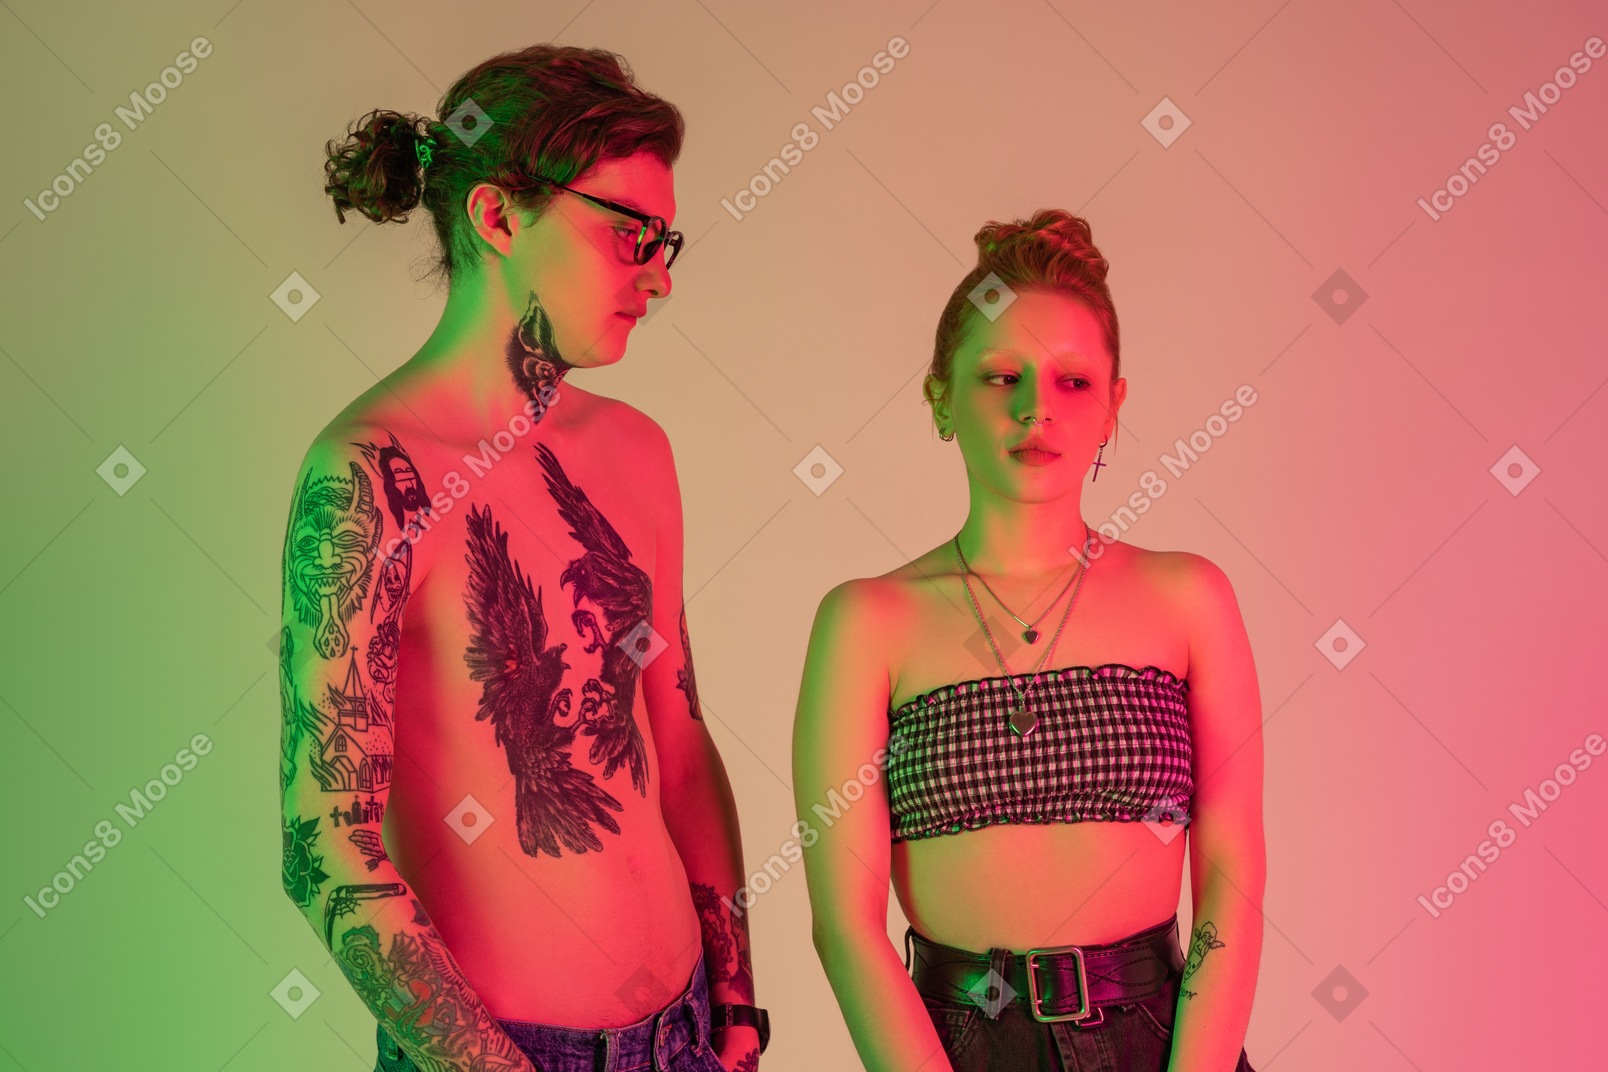 Tattooed man and his girlfriend standing in neon lights